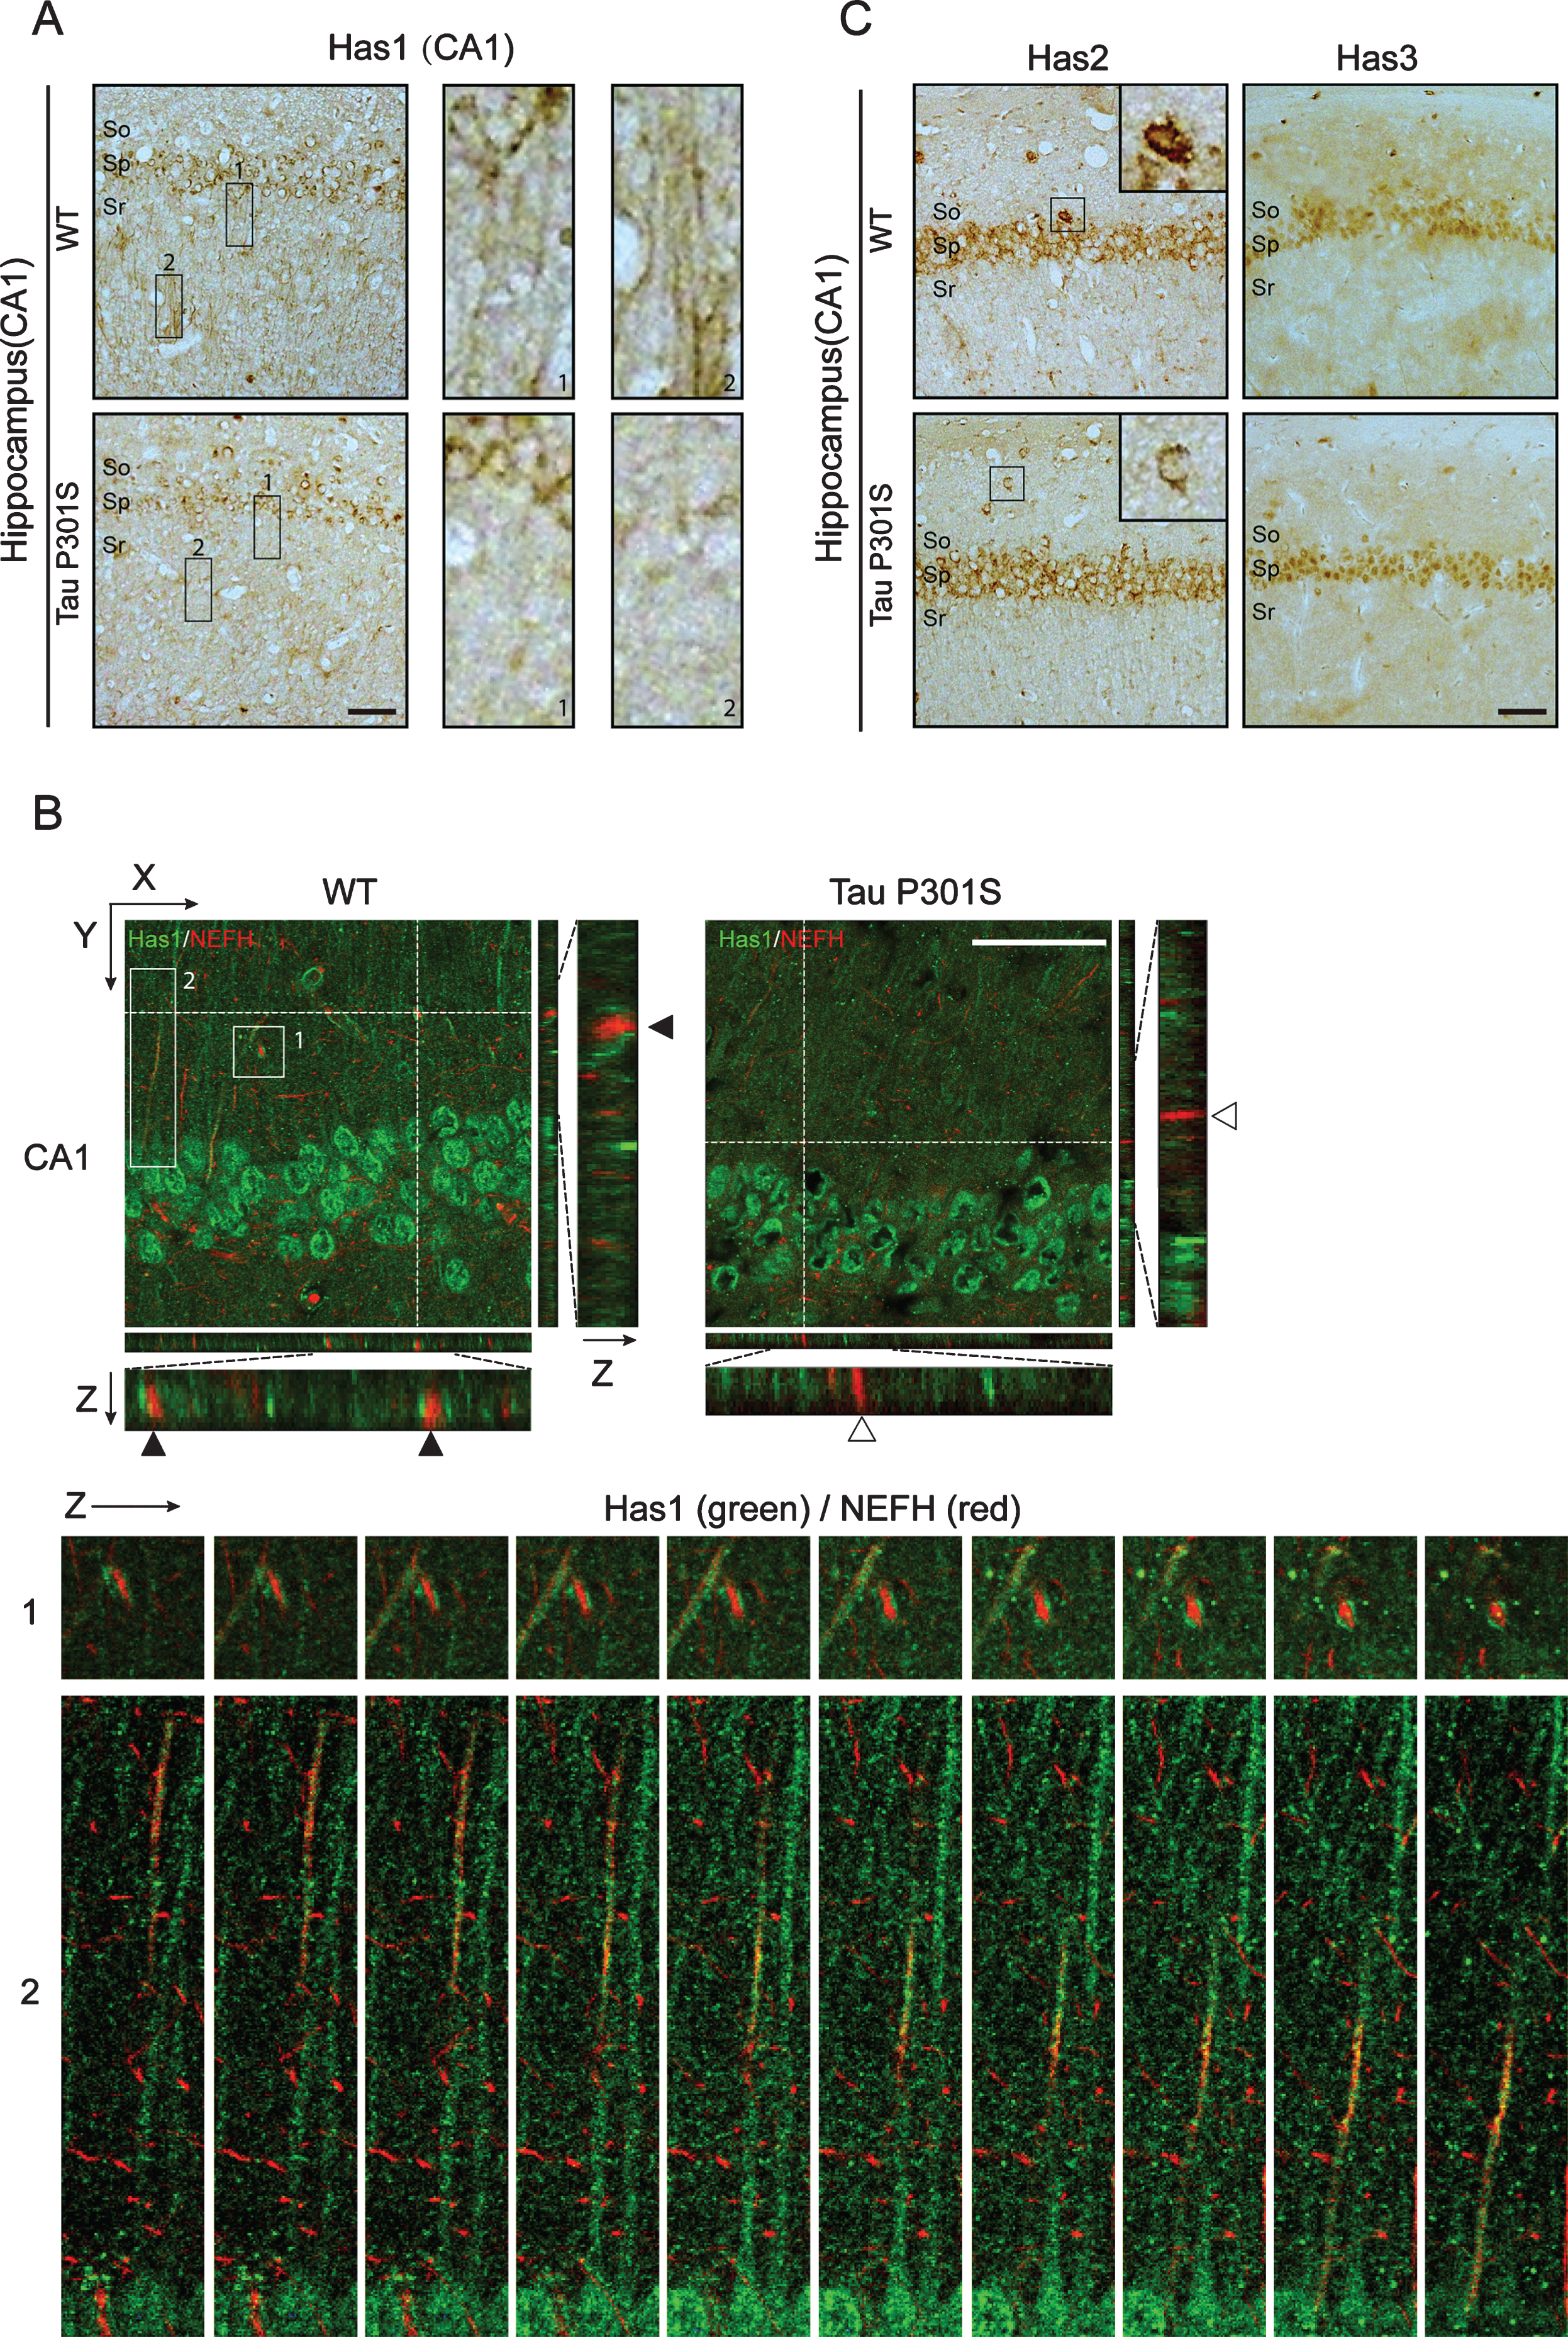 TauP301S expression inhibits the axonal-localization of Has1 in hippocampus. A, B) Immunohistochemical analyses (A) and immunofluorescence images (B) revealing the expressions and the distribution of Has1 in CA1 of the wild-type (WT) and TauP301S Tg (Tau P301S) mice (10-month-old). The enlarged regions of A showing the axonal-localization of Has1 in WT and TauP301S Tg mice. The lower panels of B are the enlarge Z section images of box 1 and 2 in the upper panel, showing the relative localization of Has1 (green) and NEFH (red) in the stratum radiatum of hippocampus. Scale bar = 50μm. C) Immunohistochemical analyses revealing the expressions of Has2 and Has3 in CA1 of WT and TauP301S Tg mice. Scale bar = 50μm.